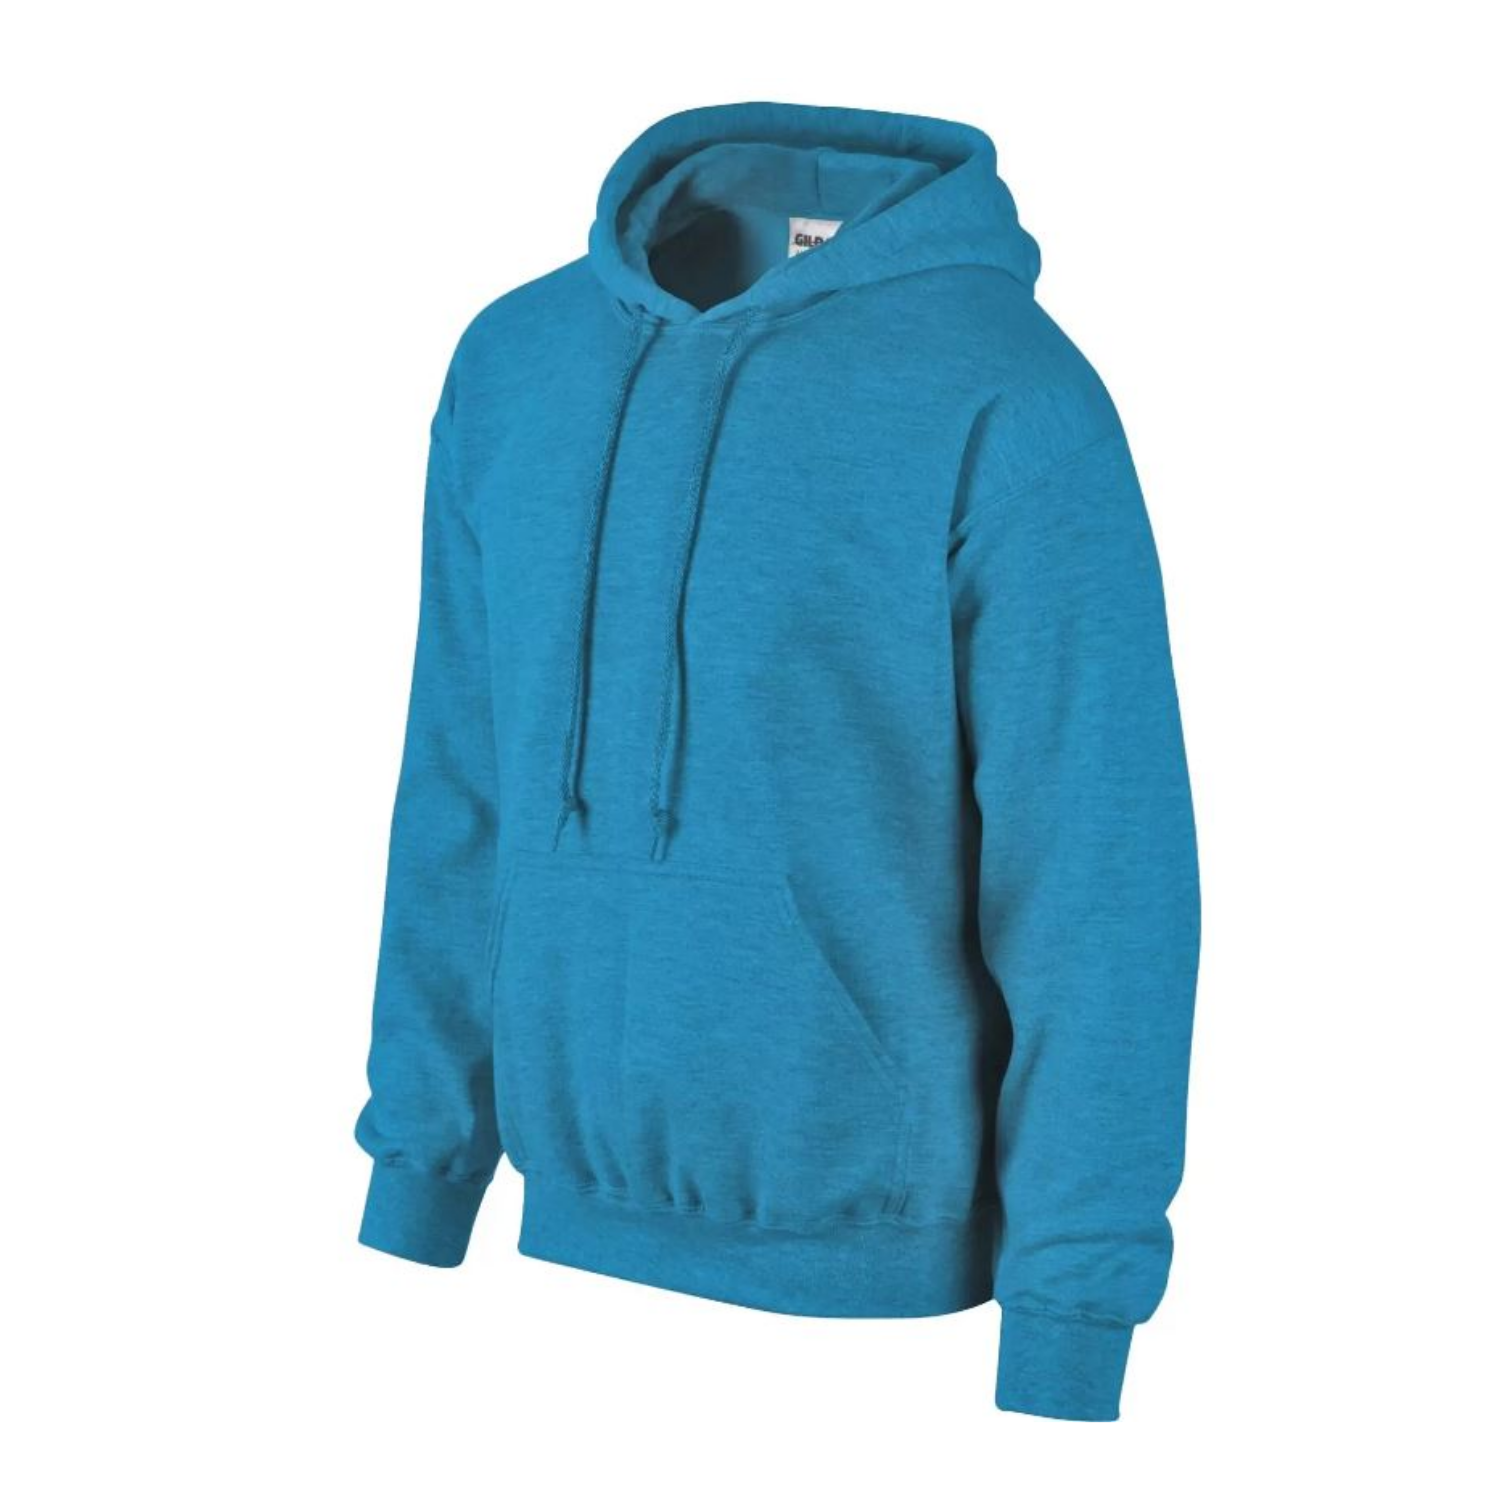 A turquoise Hoodie ready to be custom printed.